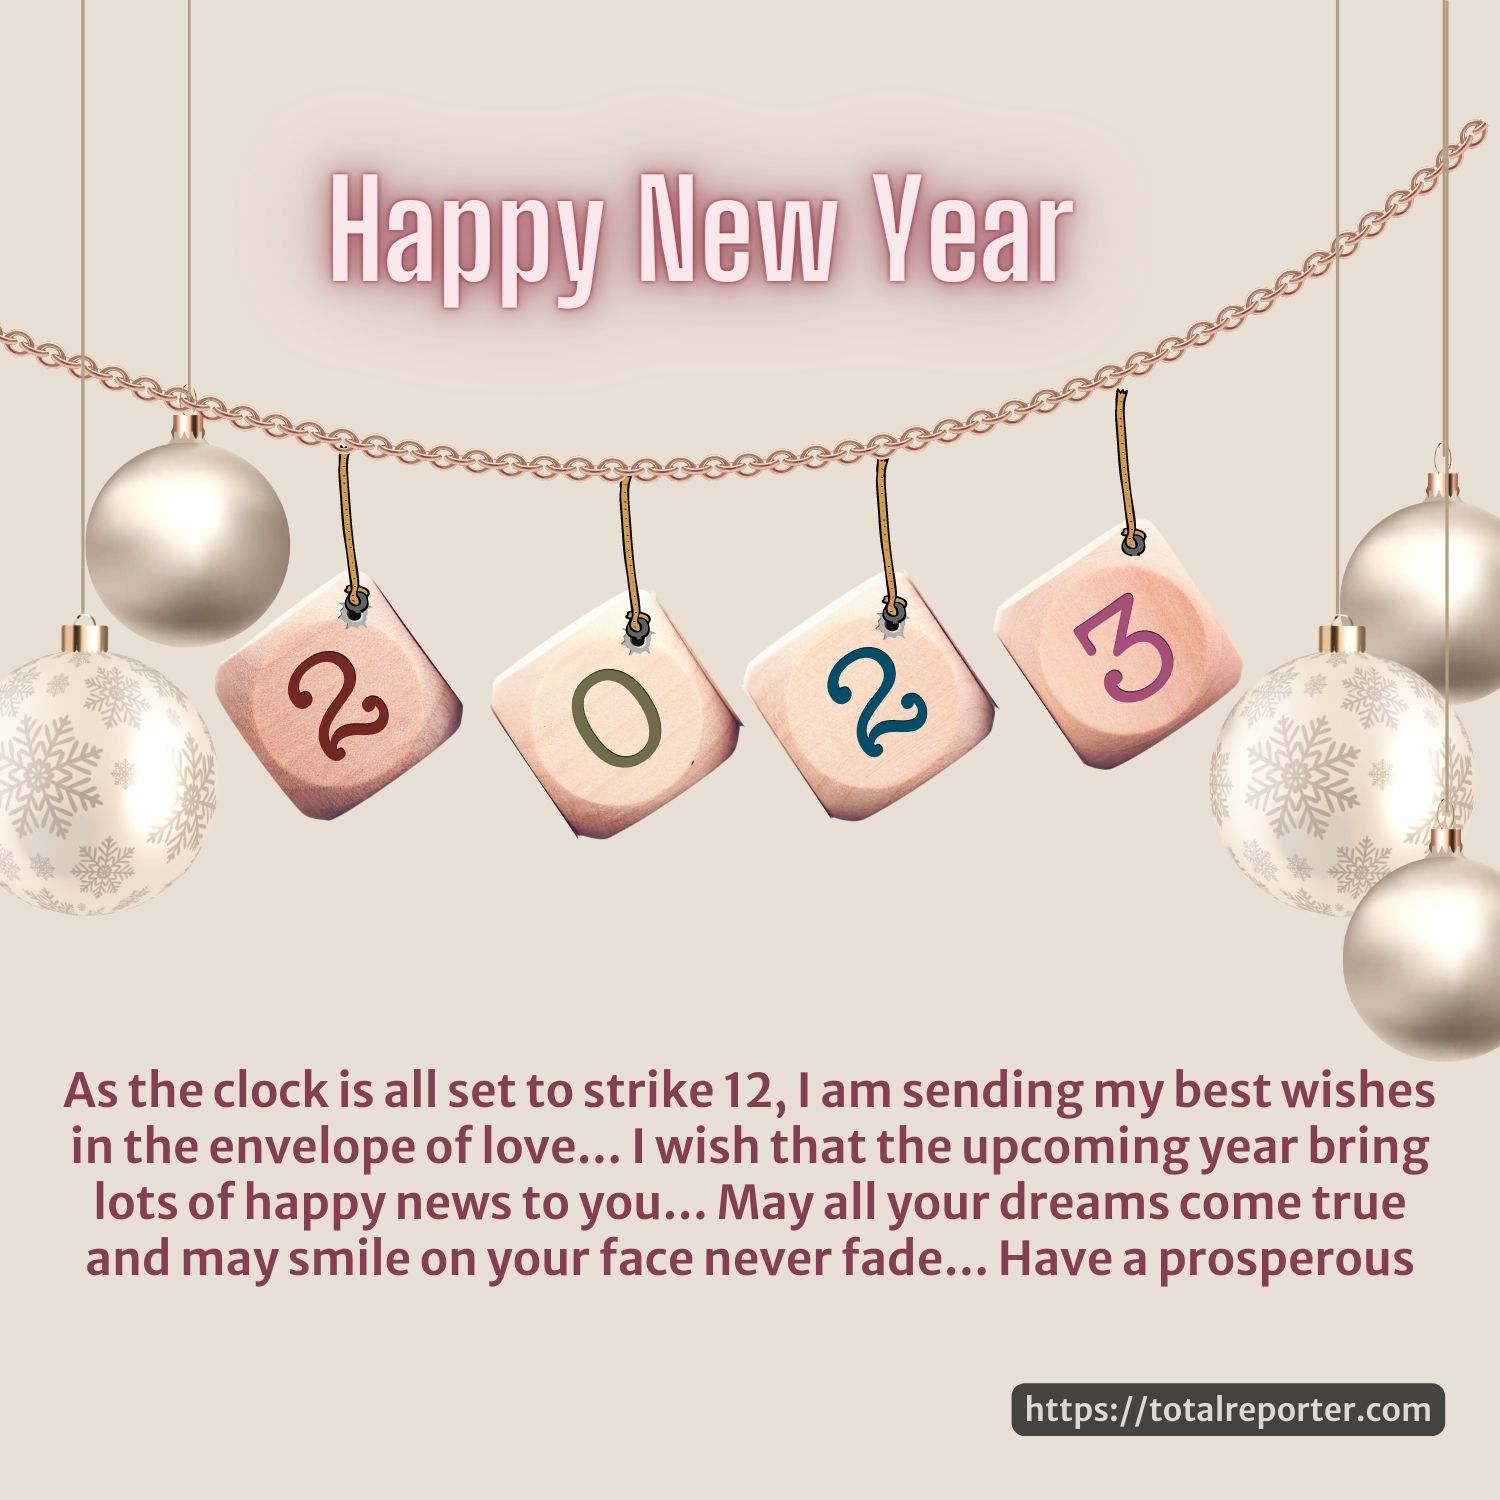 Happy New Year 2023 wishes pictures